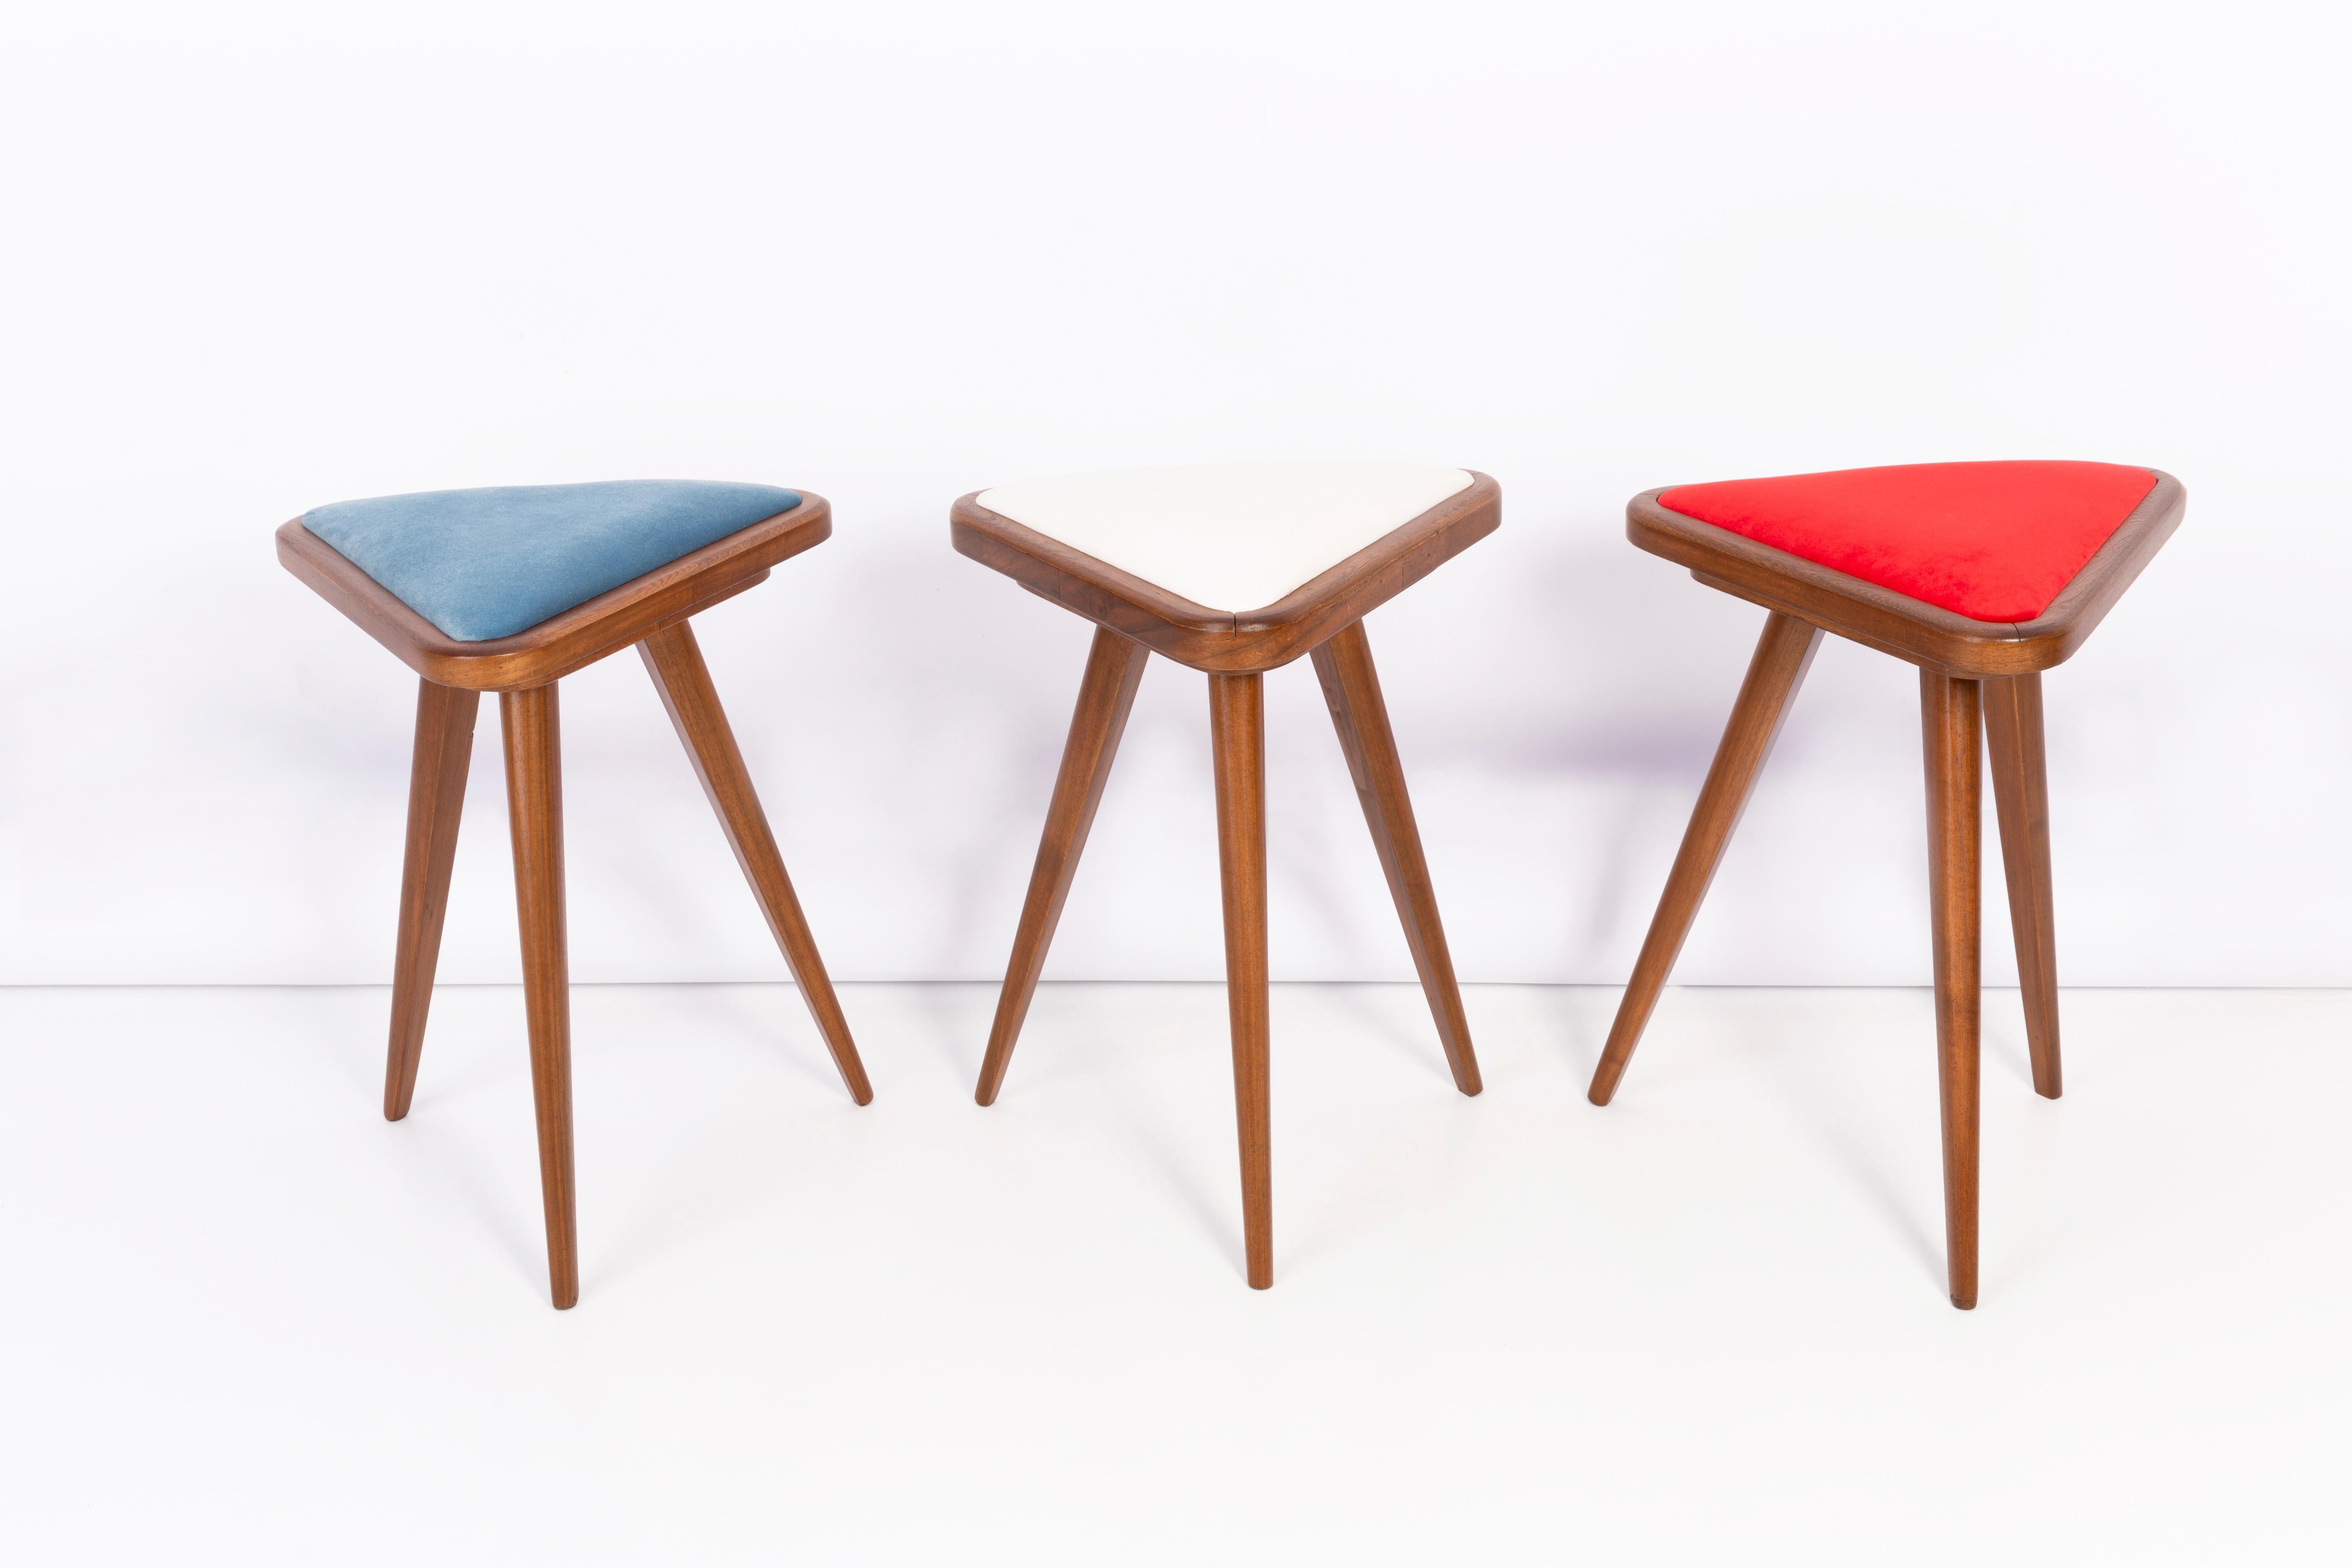 Hand-Crafted Set of Four 20th Century Stools, 1960s